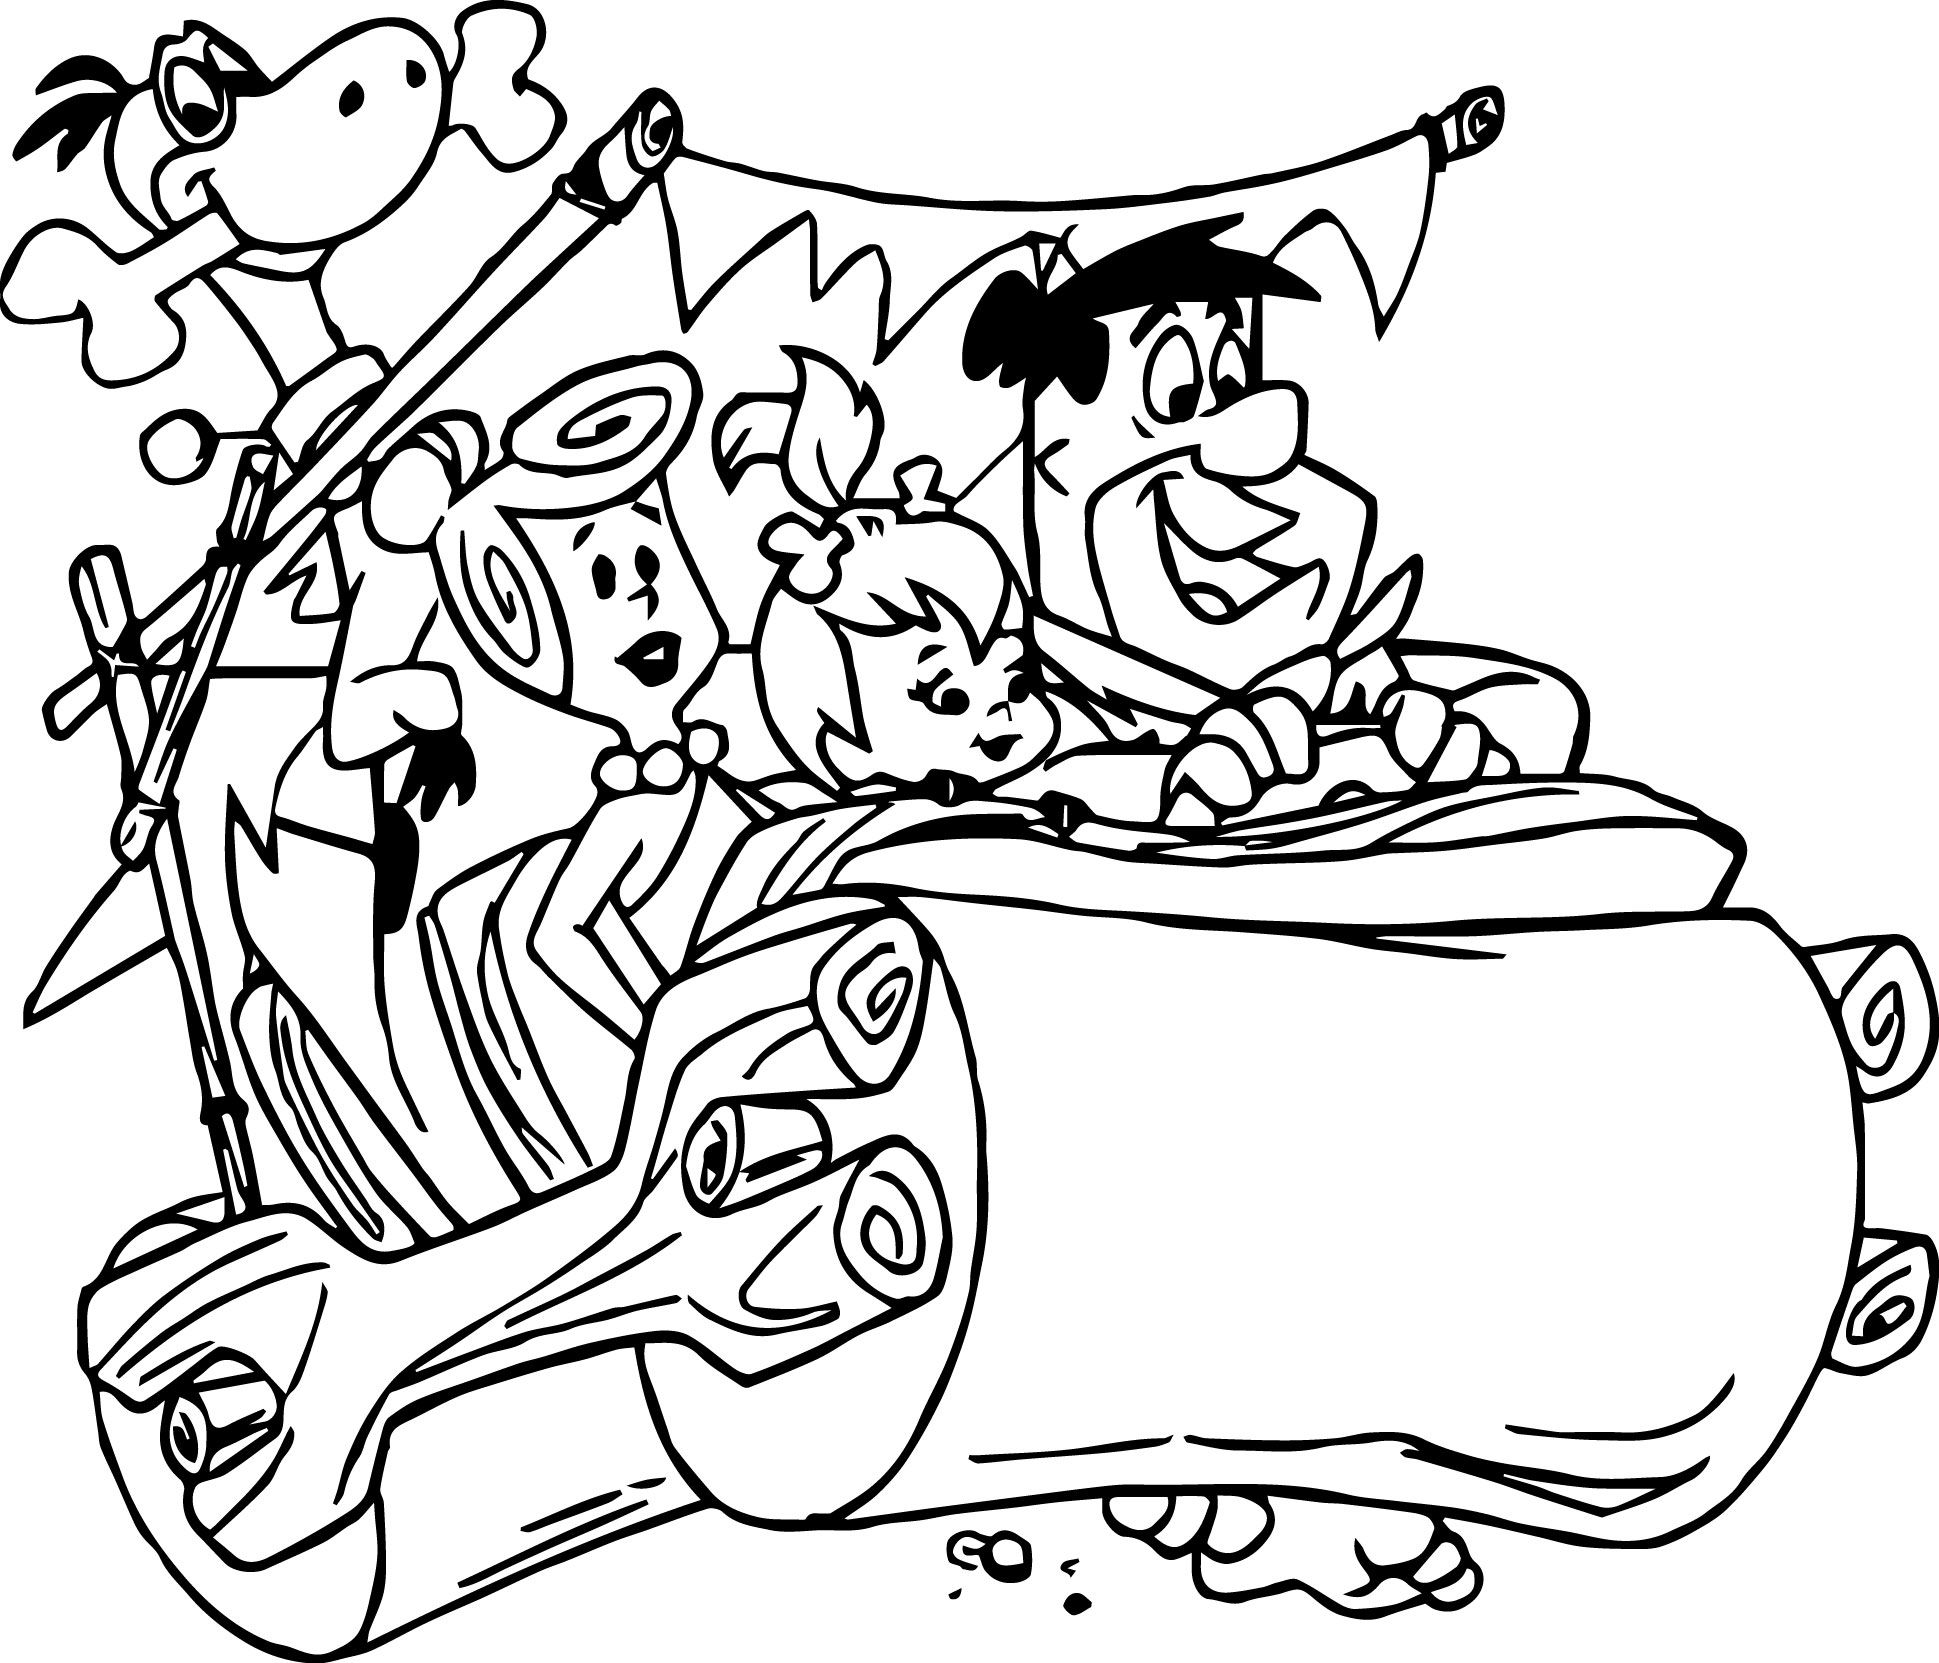 The Flintstones in their car colouring image